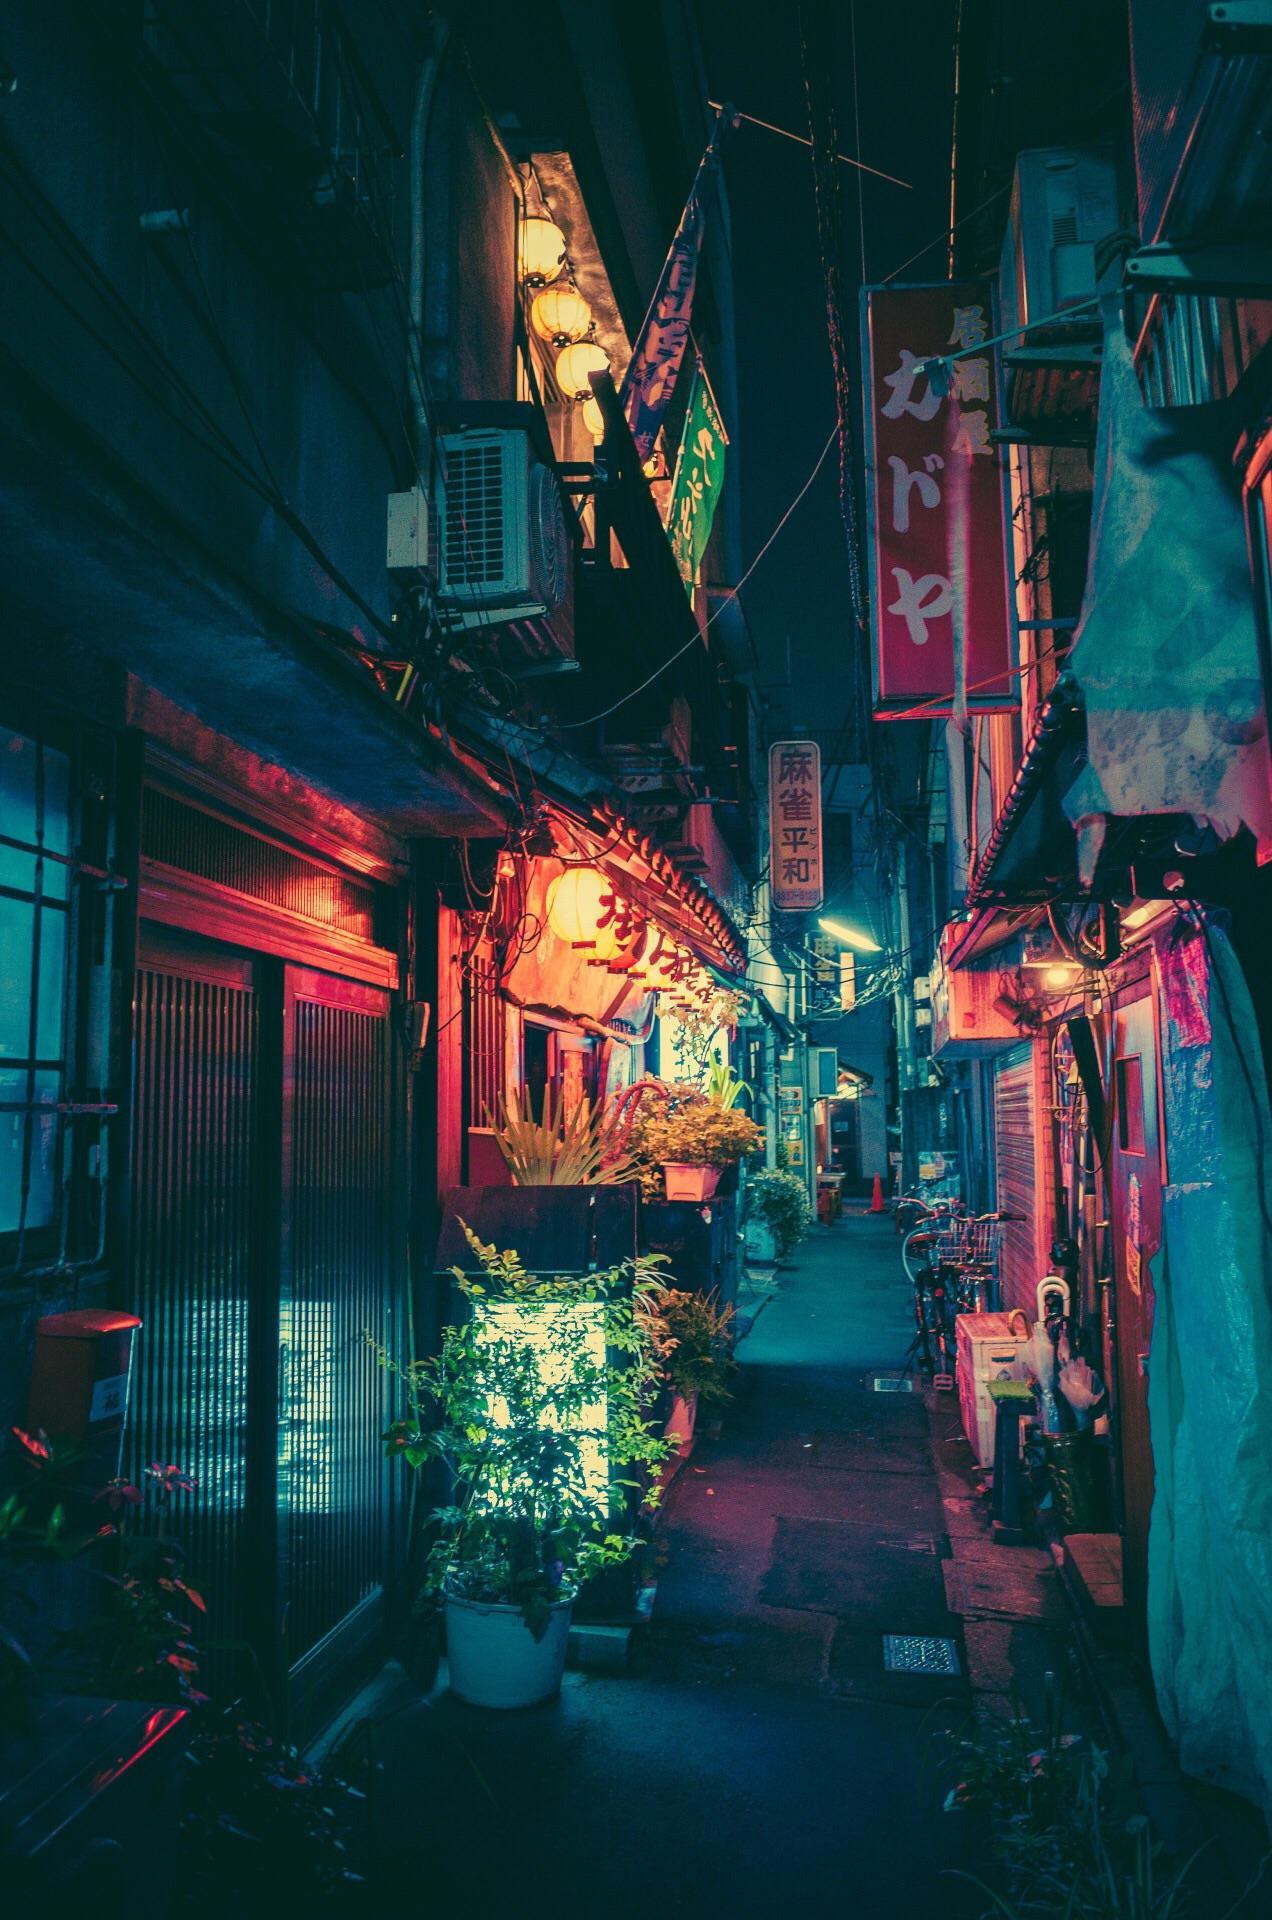 Japanese alley that's been my wallpaper for years